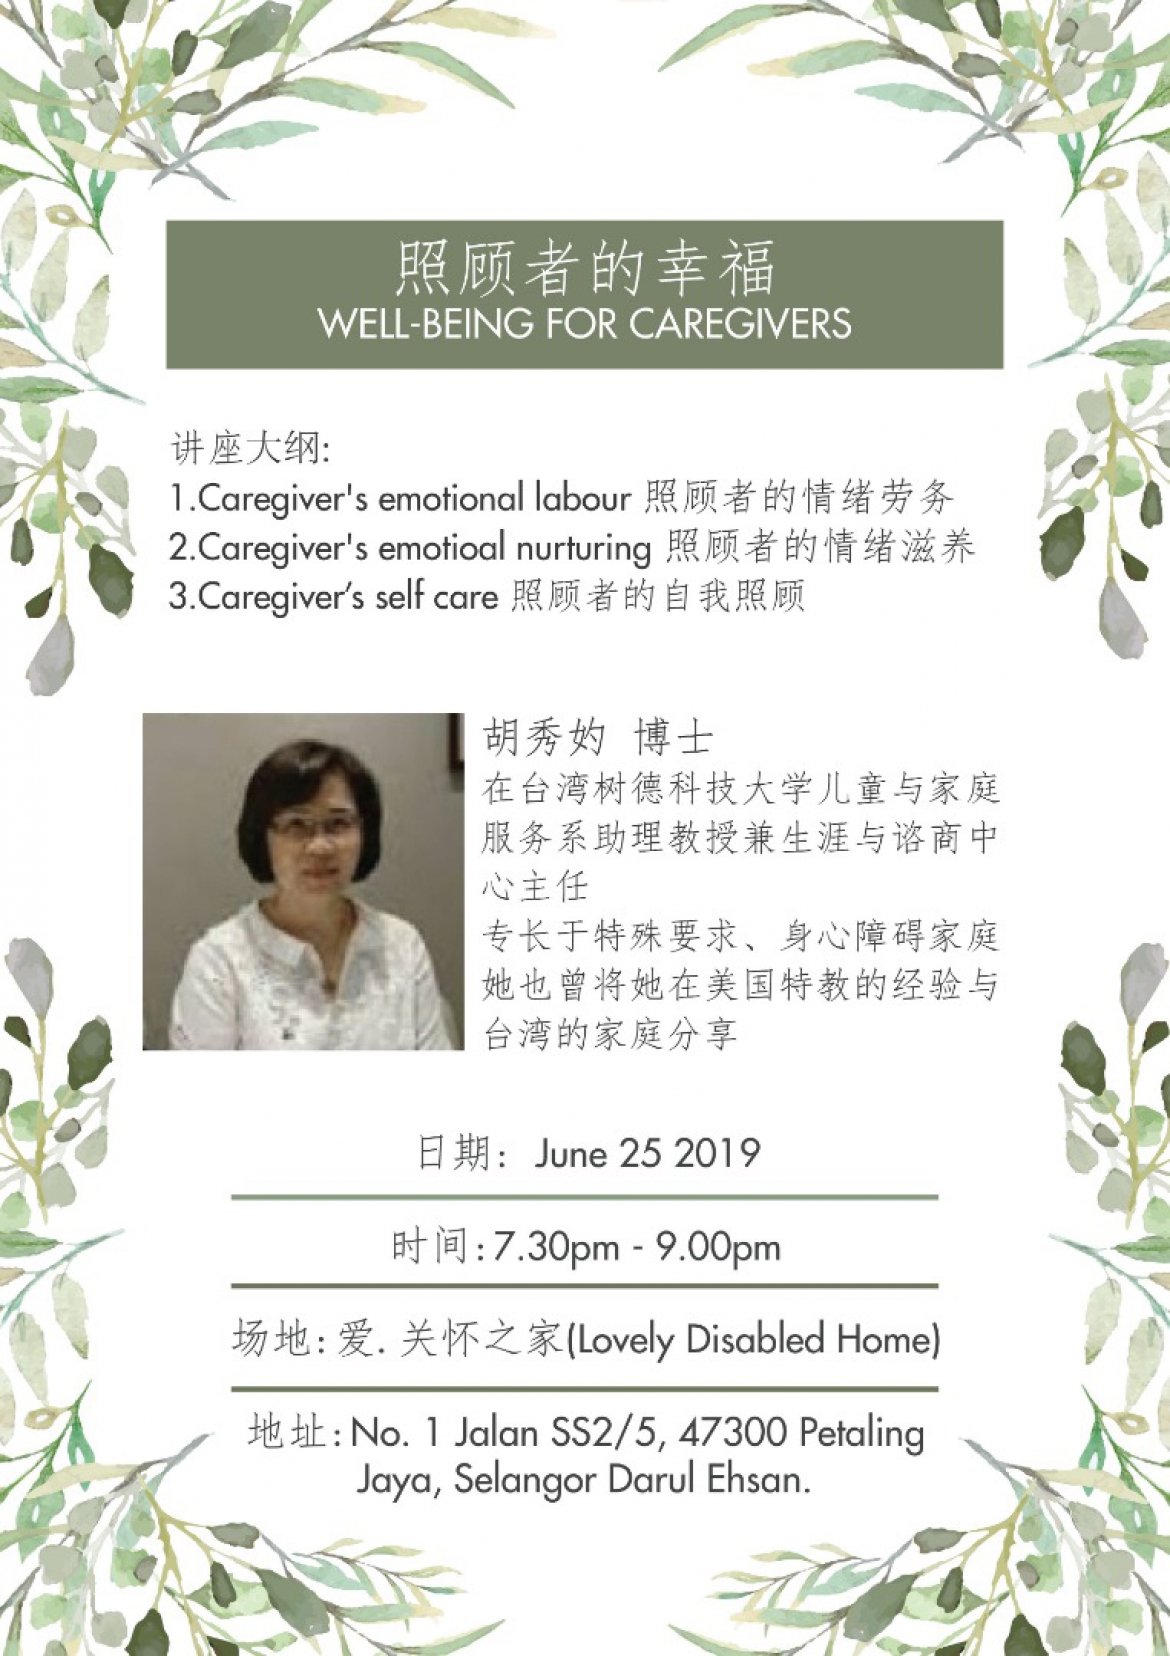 Well-Being For Caregivers